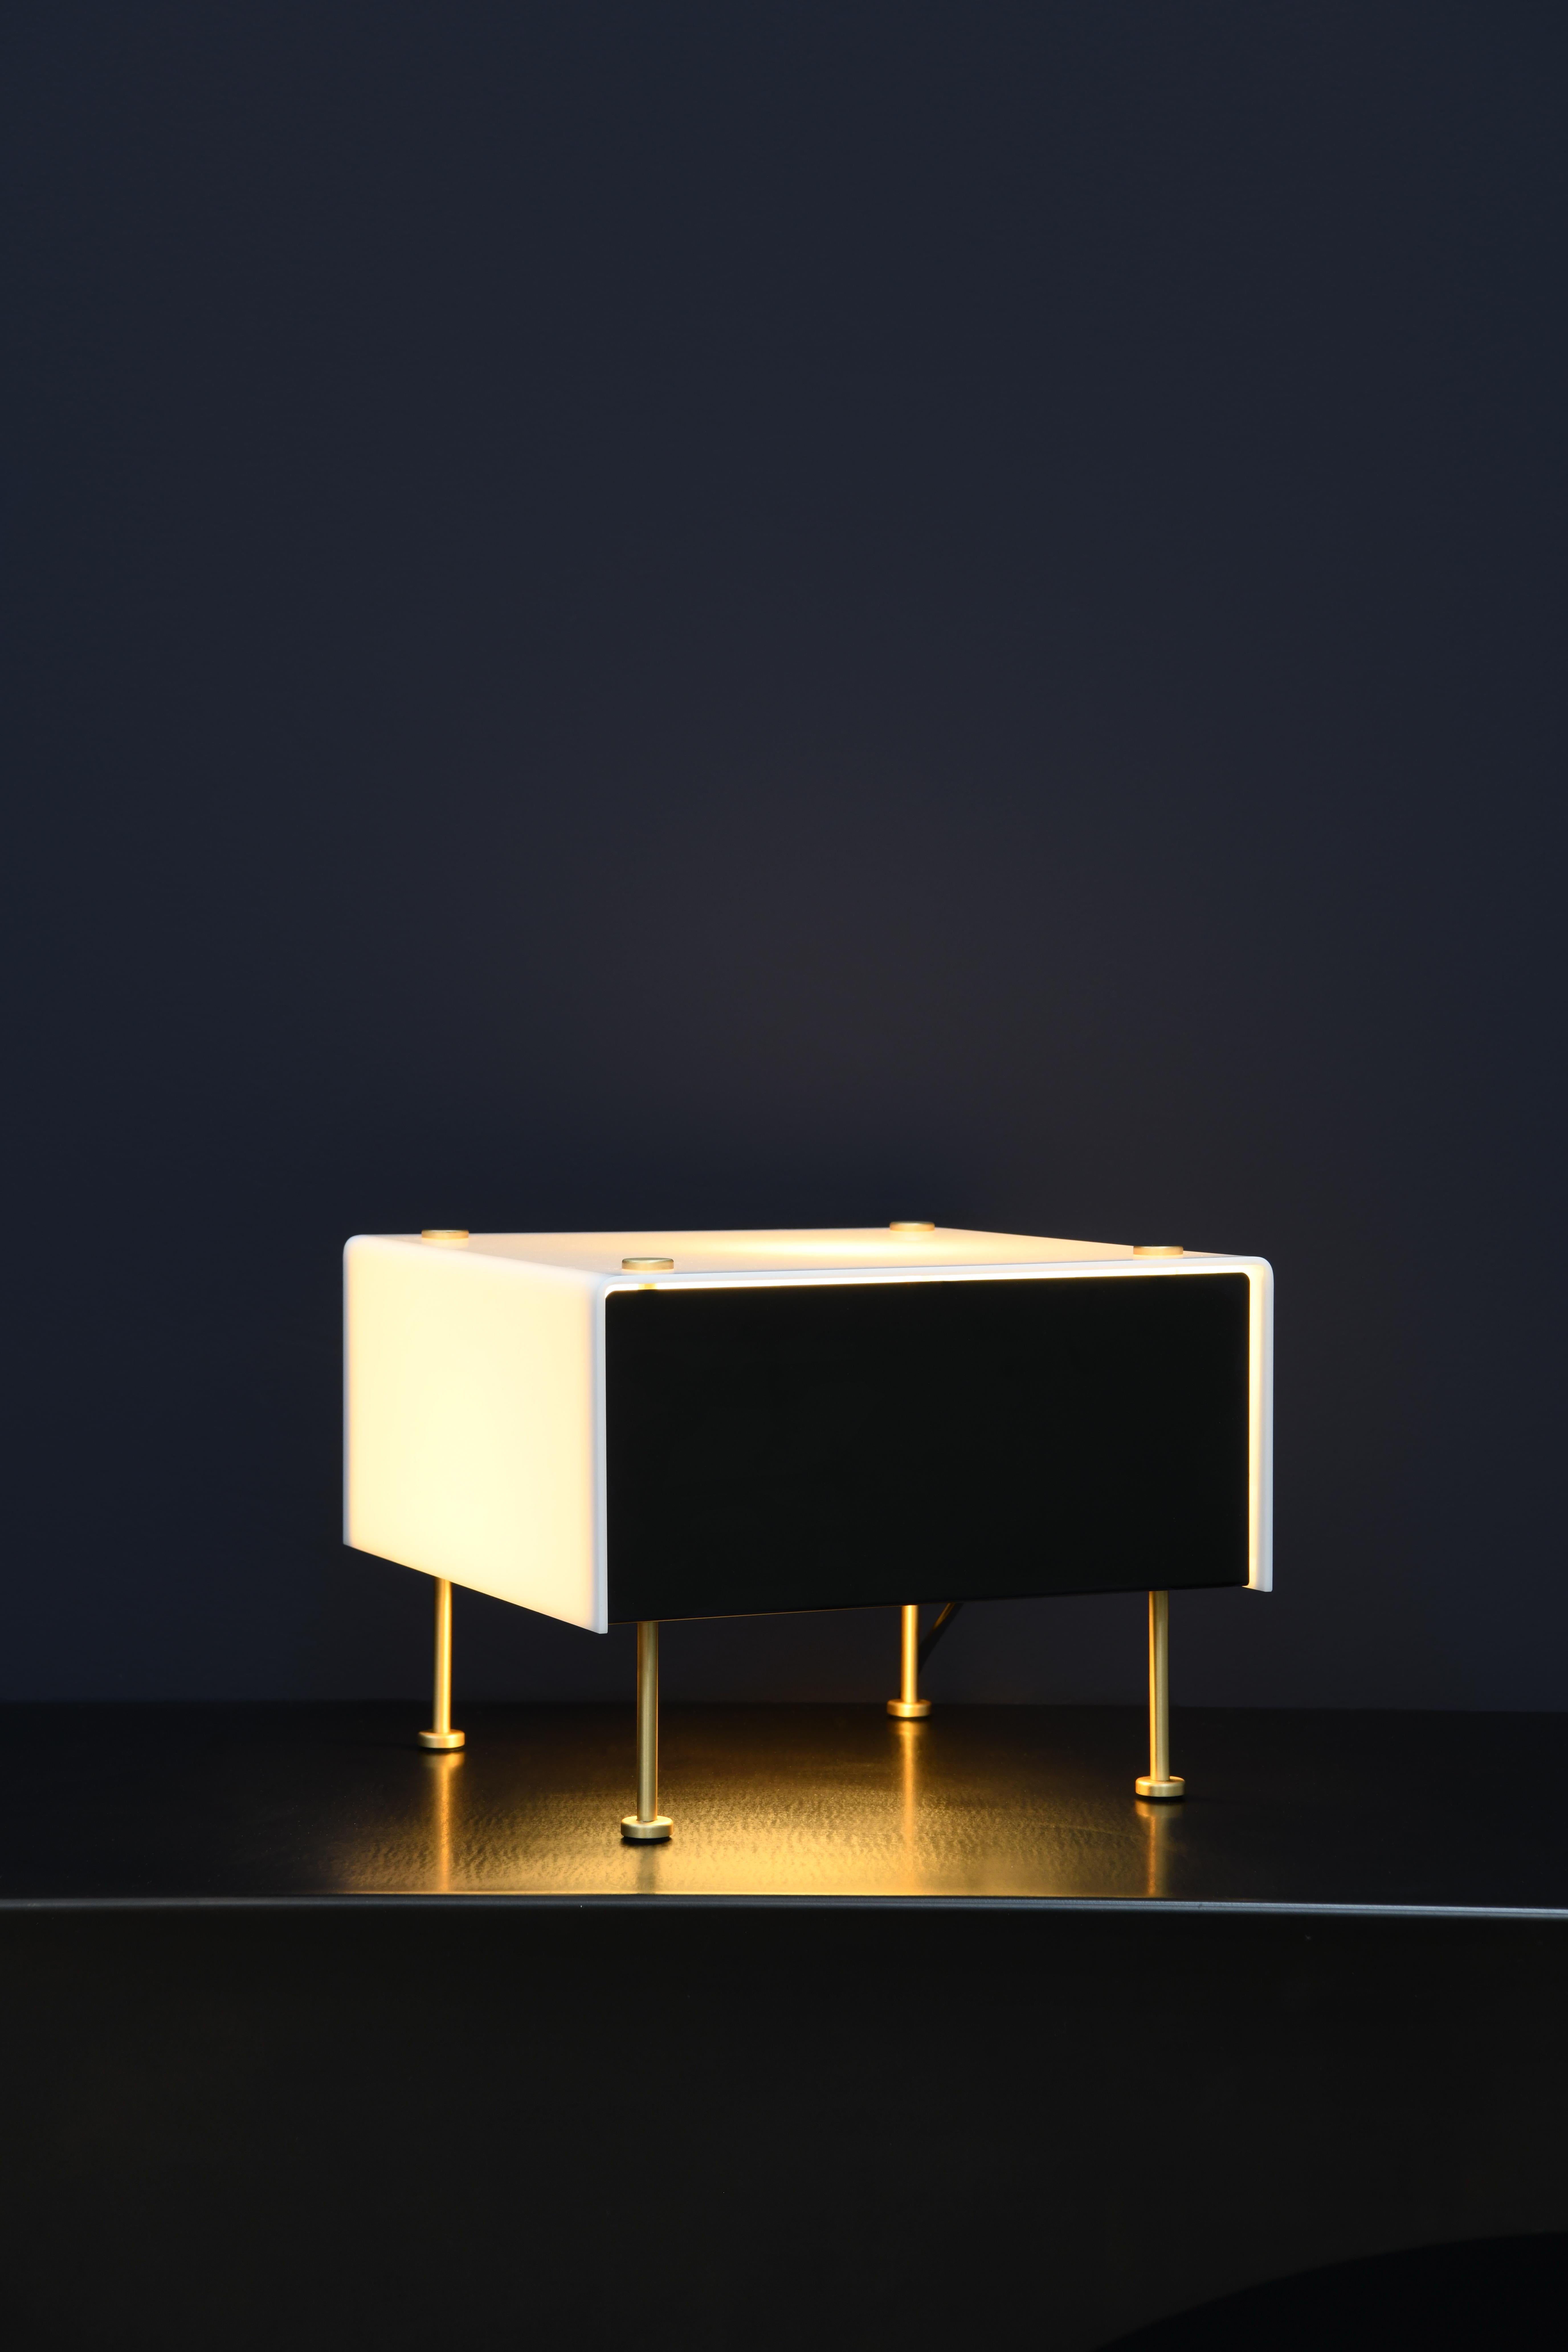 Large Pierre Guariche 'G60' table lamp for Sammode Studio. 

Originally designed by Pierre Guariche, this iconic luminaire is a newly produced authorized re-edition by Sammode Studio in France embracing many of the same small-scale manufacturing